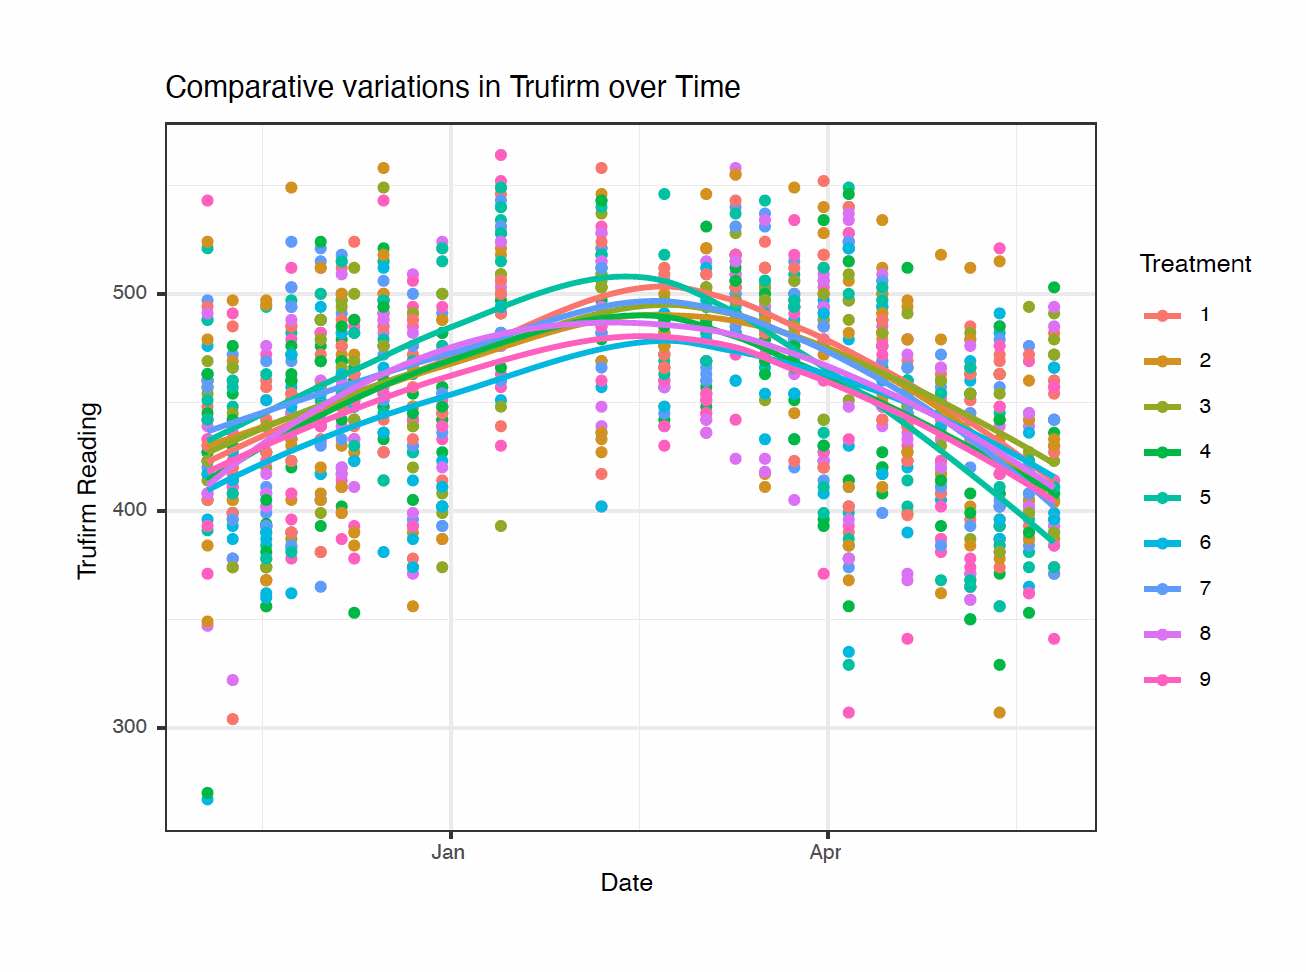 Trufirm readings over time vs Treatment over time